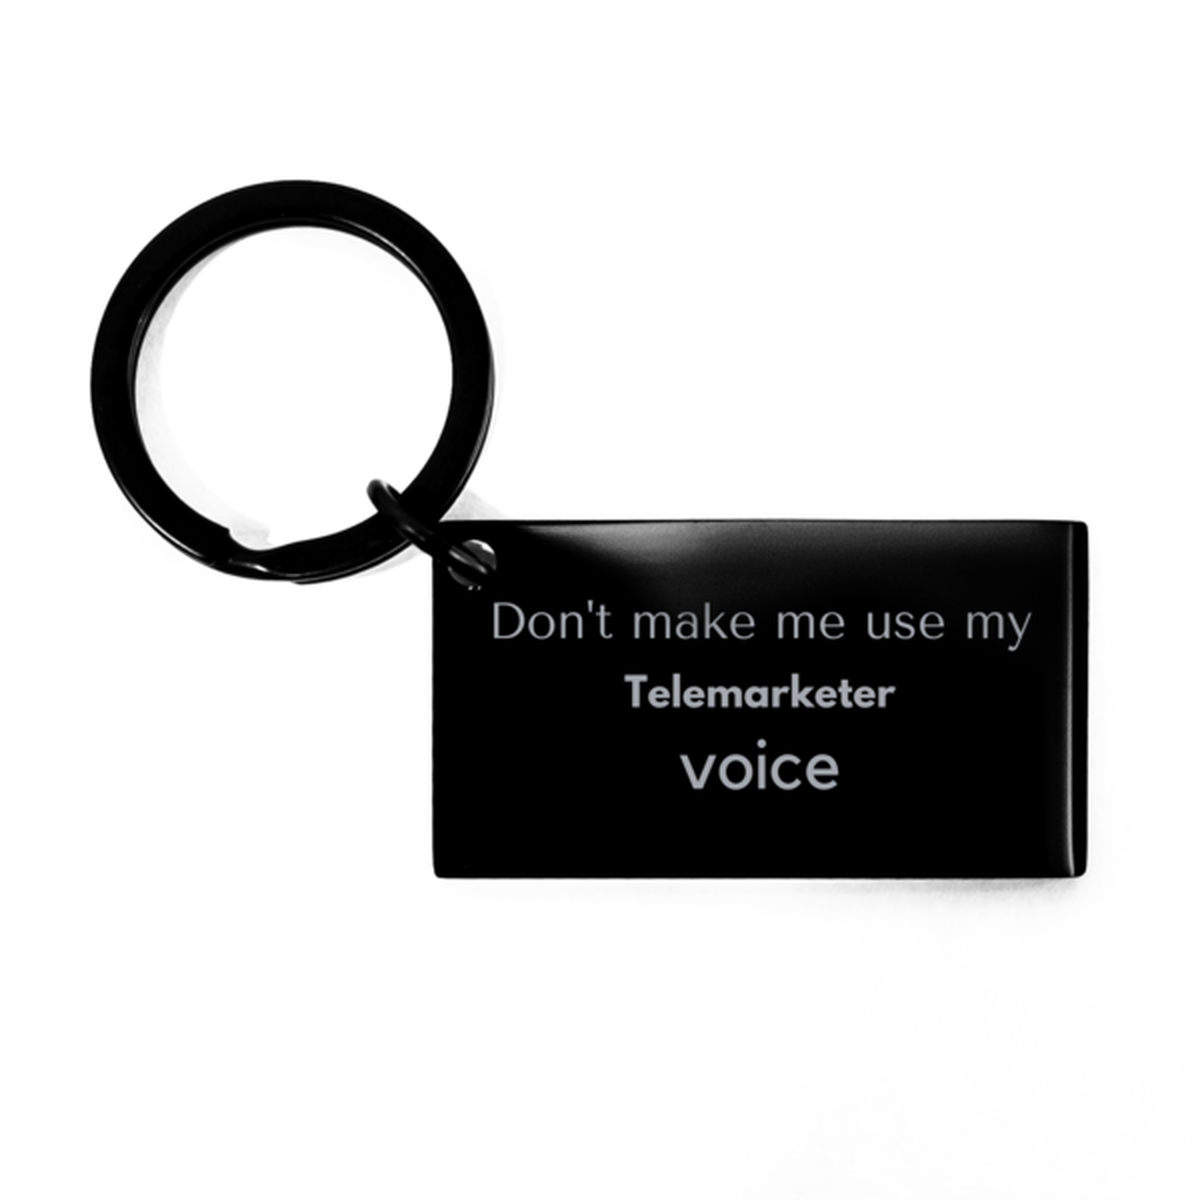 Don't make me use my Telemarketer voice, Sarcasm Telemarketer Gifts, Christmas Telemarketer Keychain Birthday Unique Gifts For Telemarketer Coworkers, Men, Women, Colleague, Friends